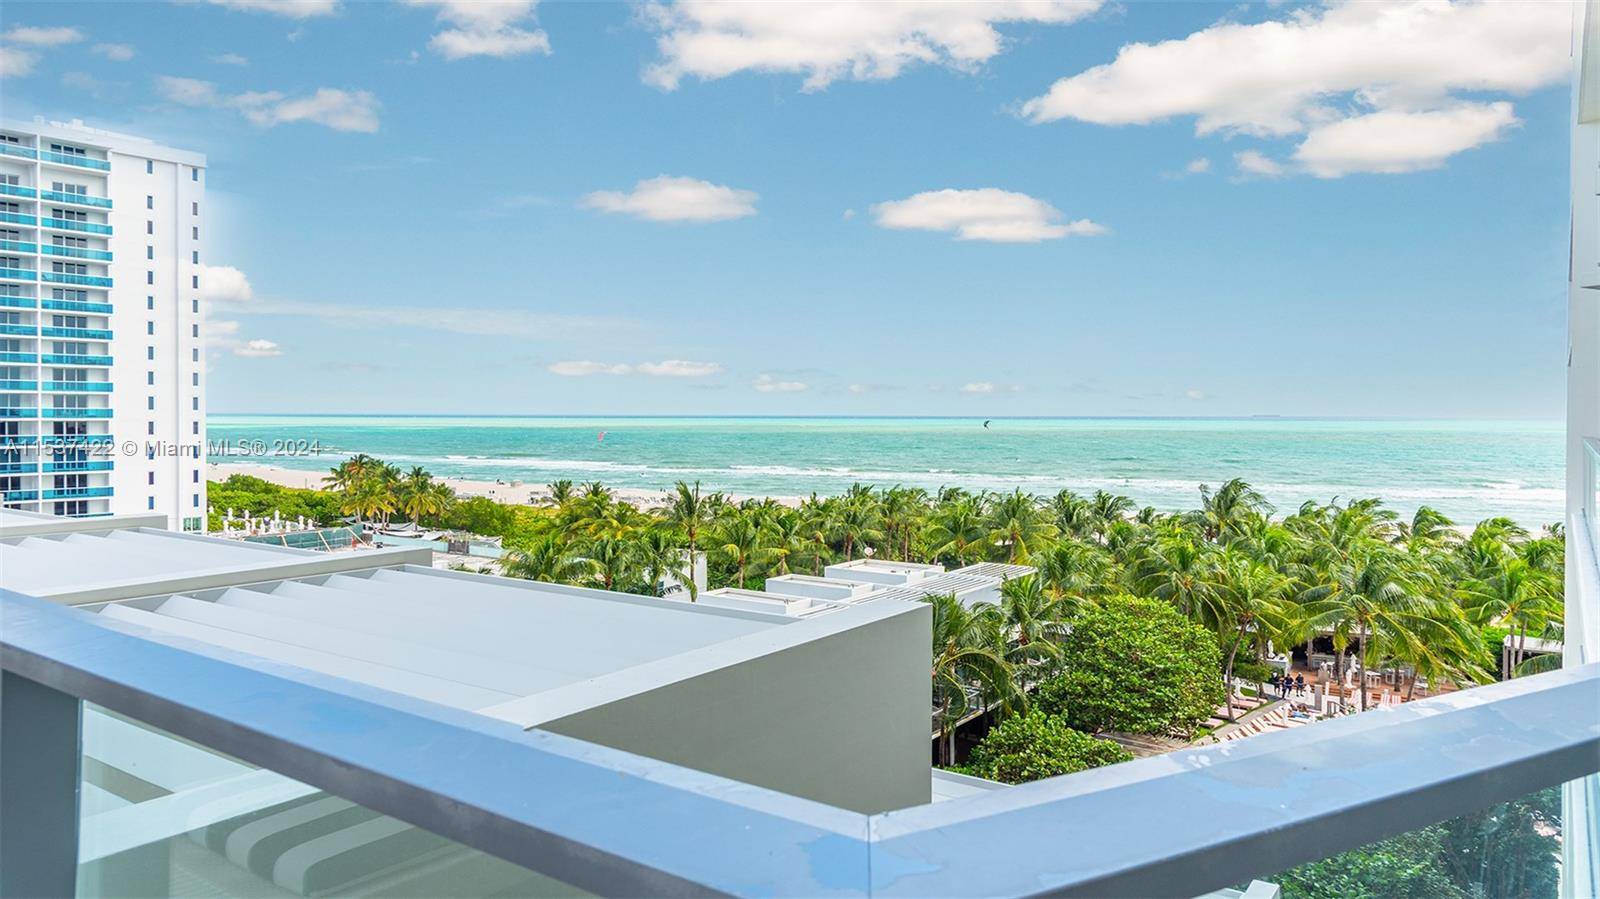 Resort style living in this oceanfront residence situated at the prestigious W South Beach Hotel.